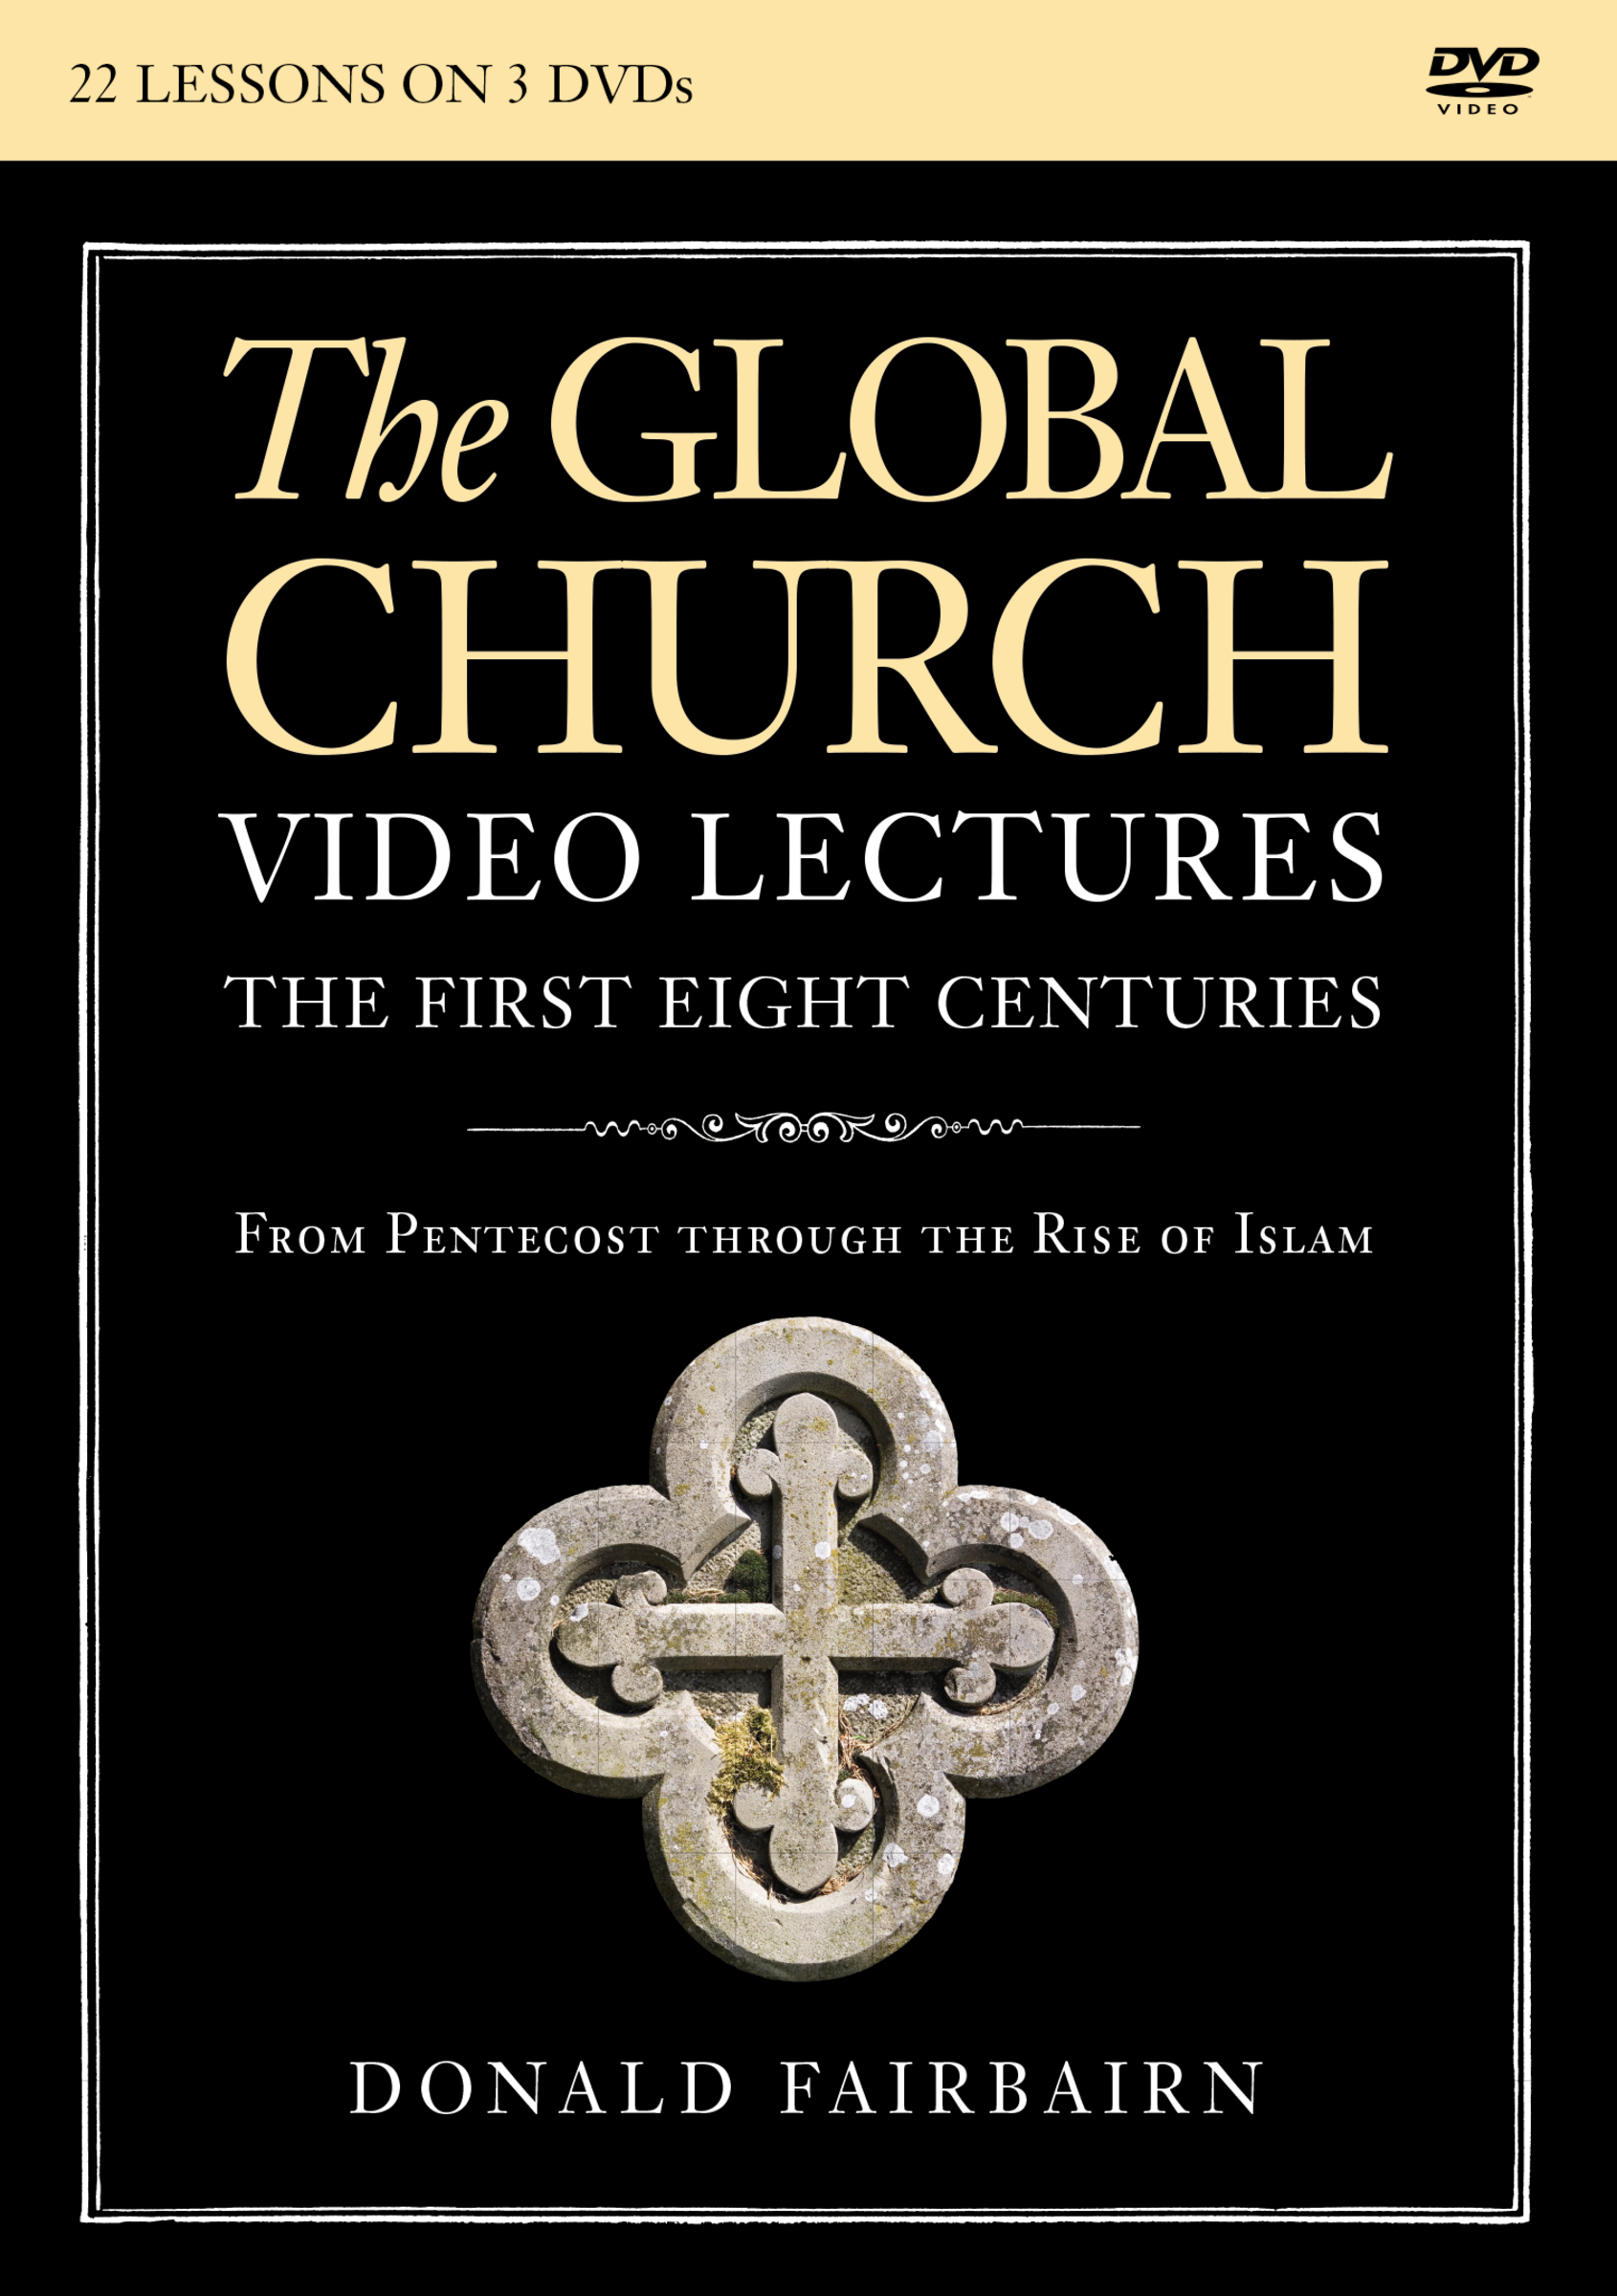 The Global Church---The First Eight Centuries Video Lectures